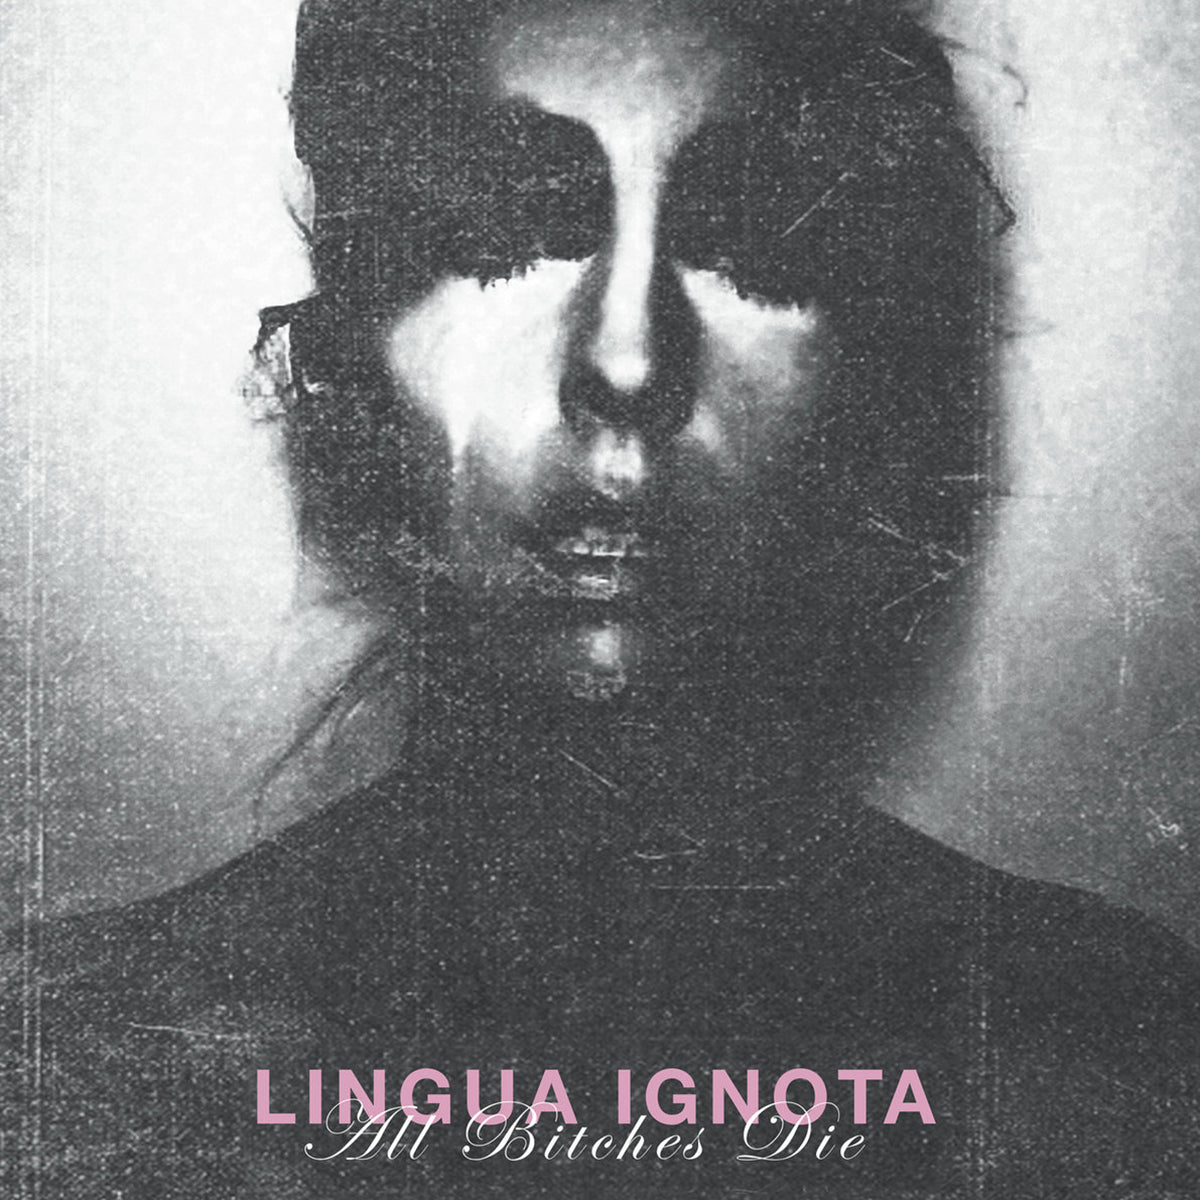 LINGUA IGNOTA "All Bitches Die" LP